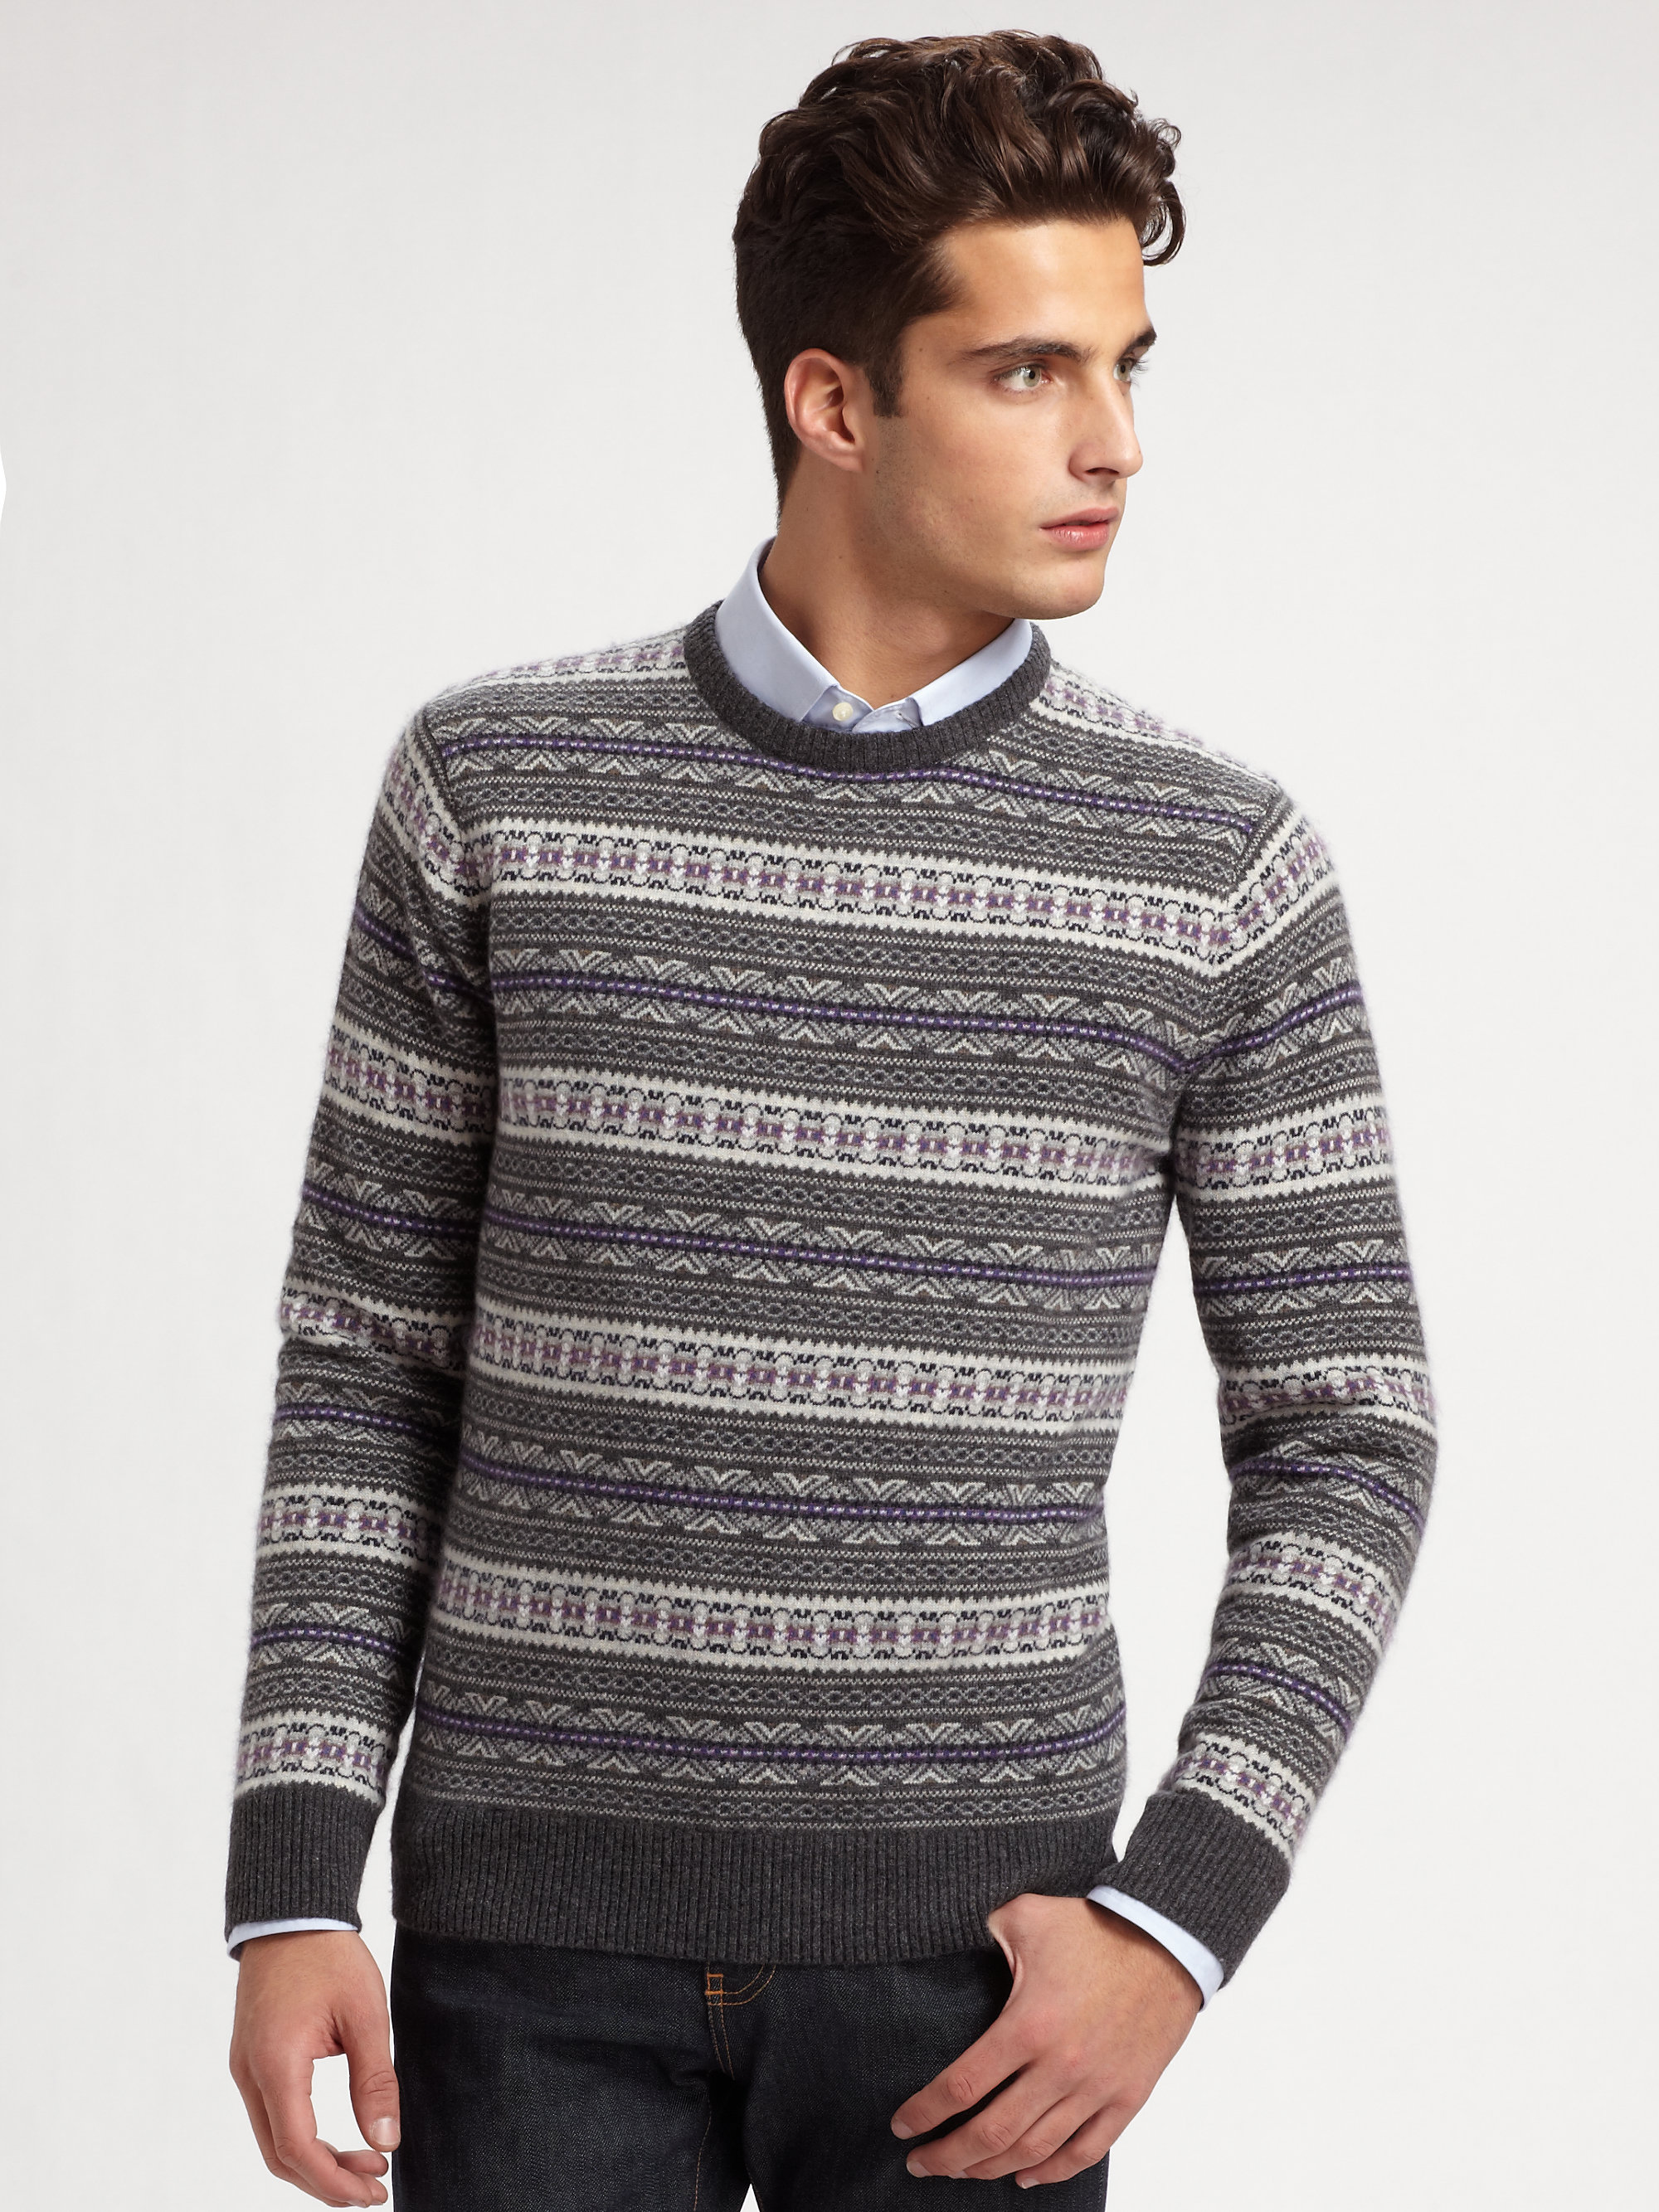 Lyst - Saks Fifth Avenue Crewneck Cashmere Sweater in Gray for Men